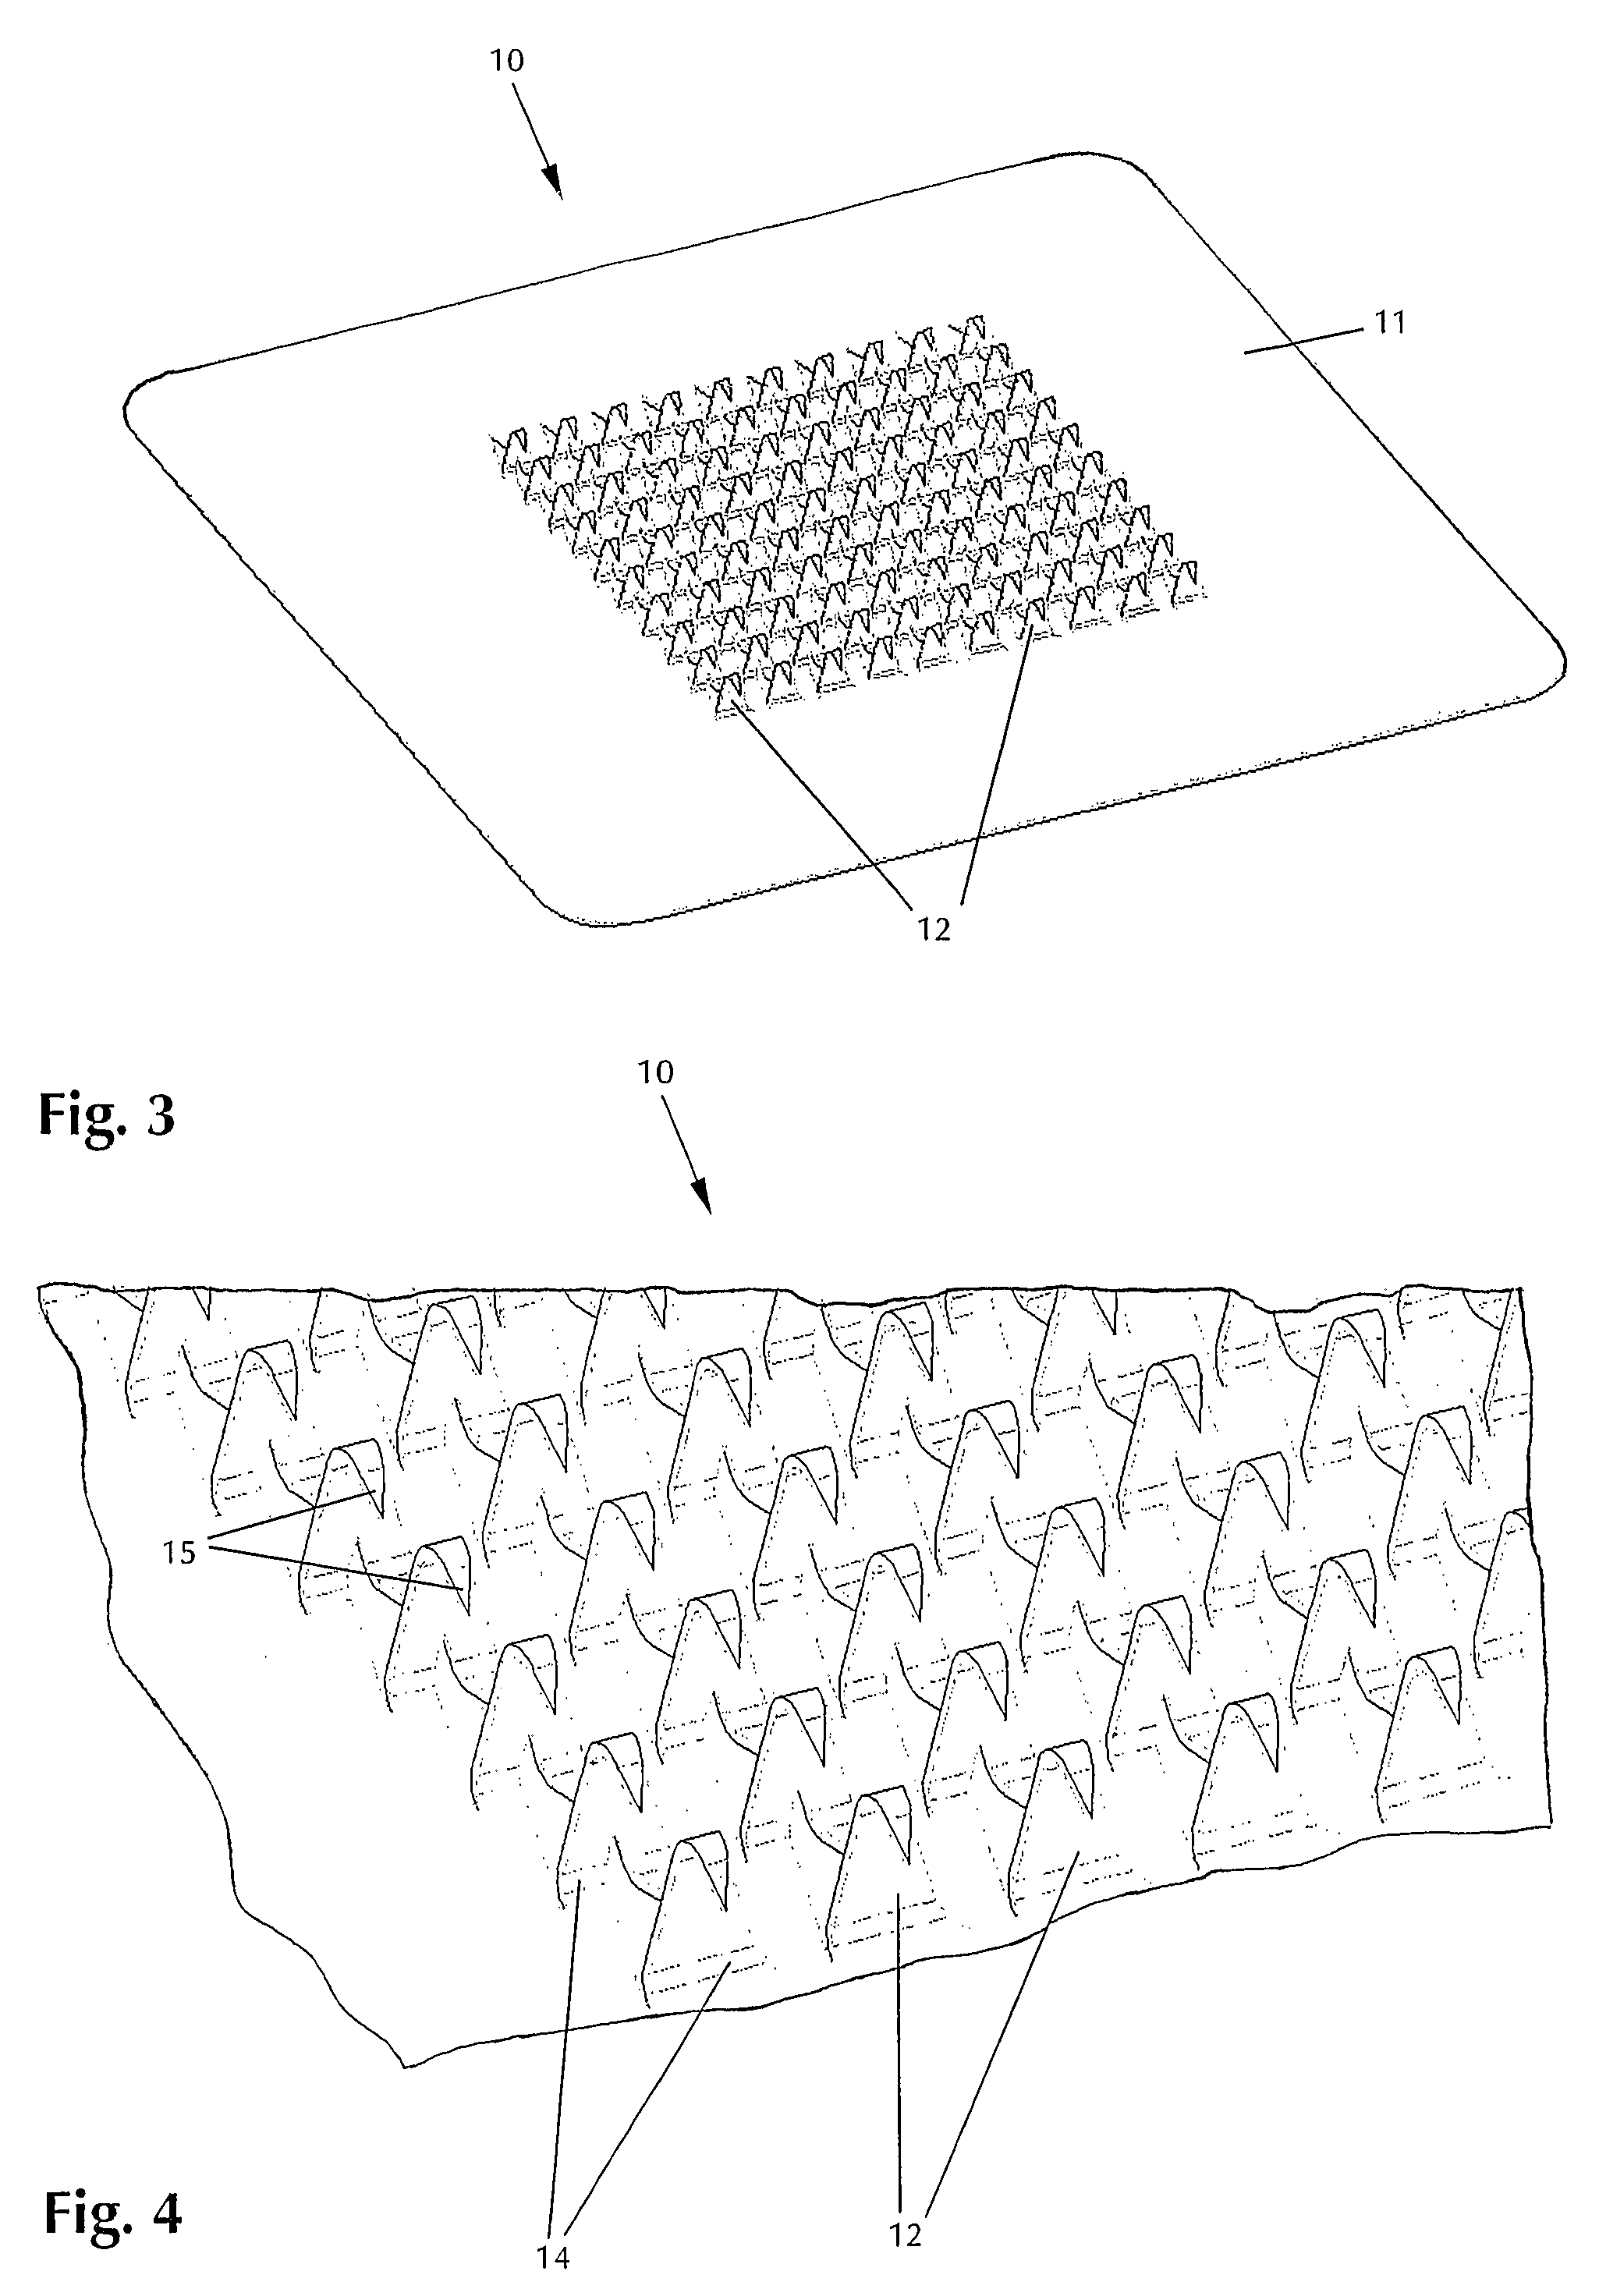 Mounting device having a metallic base plate with multiple hook-like projections obtained by stamping or laser cutting and bending